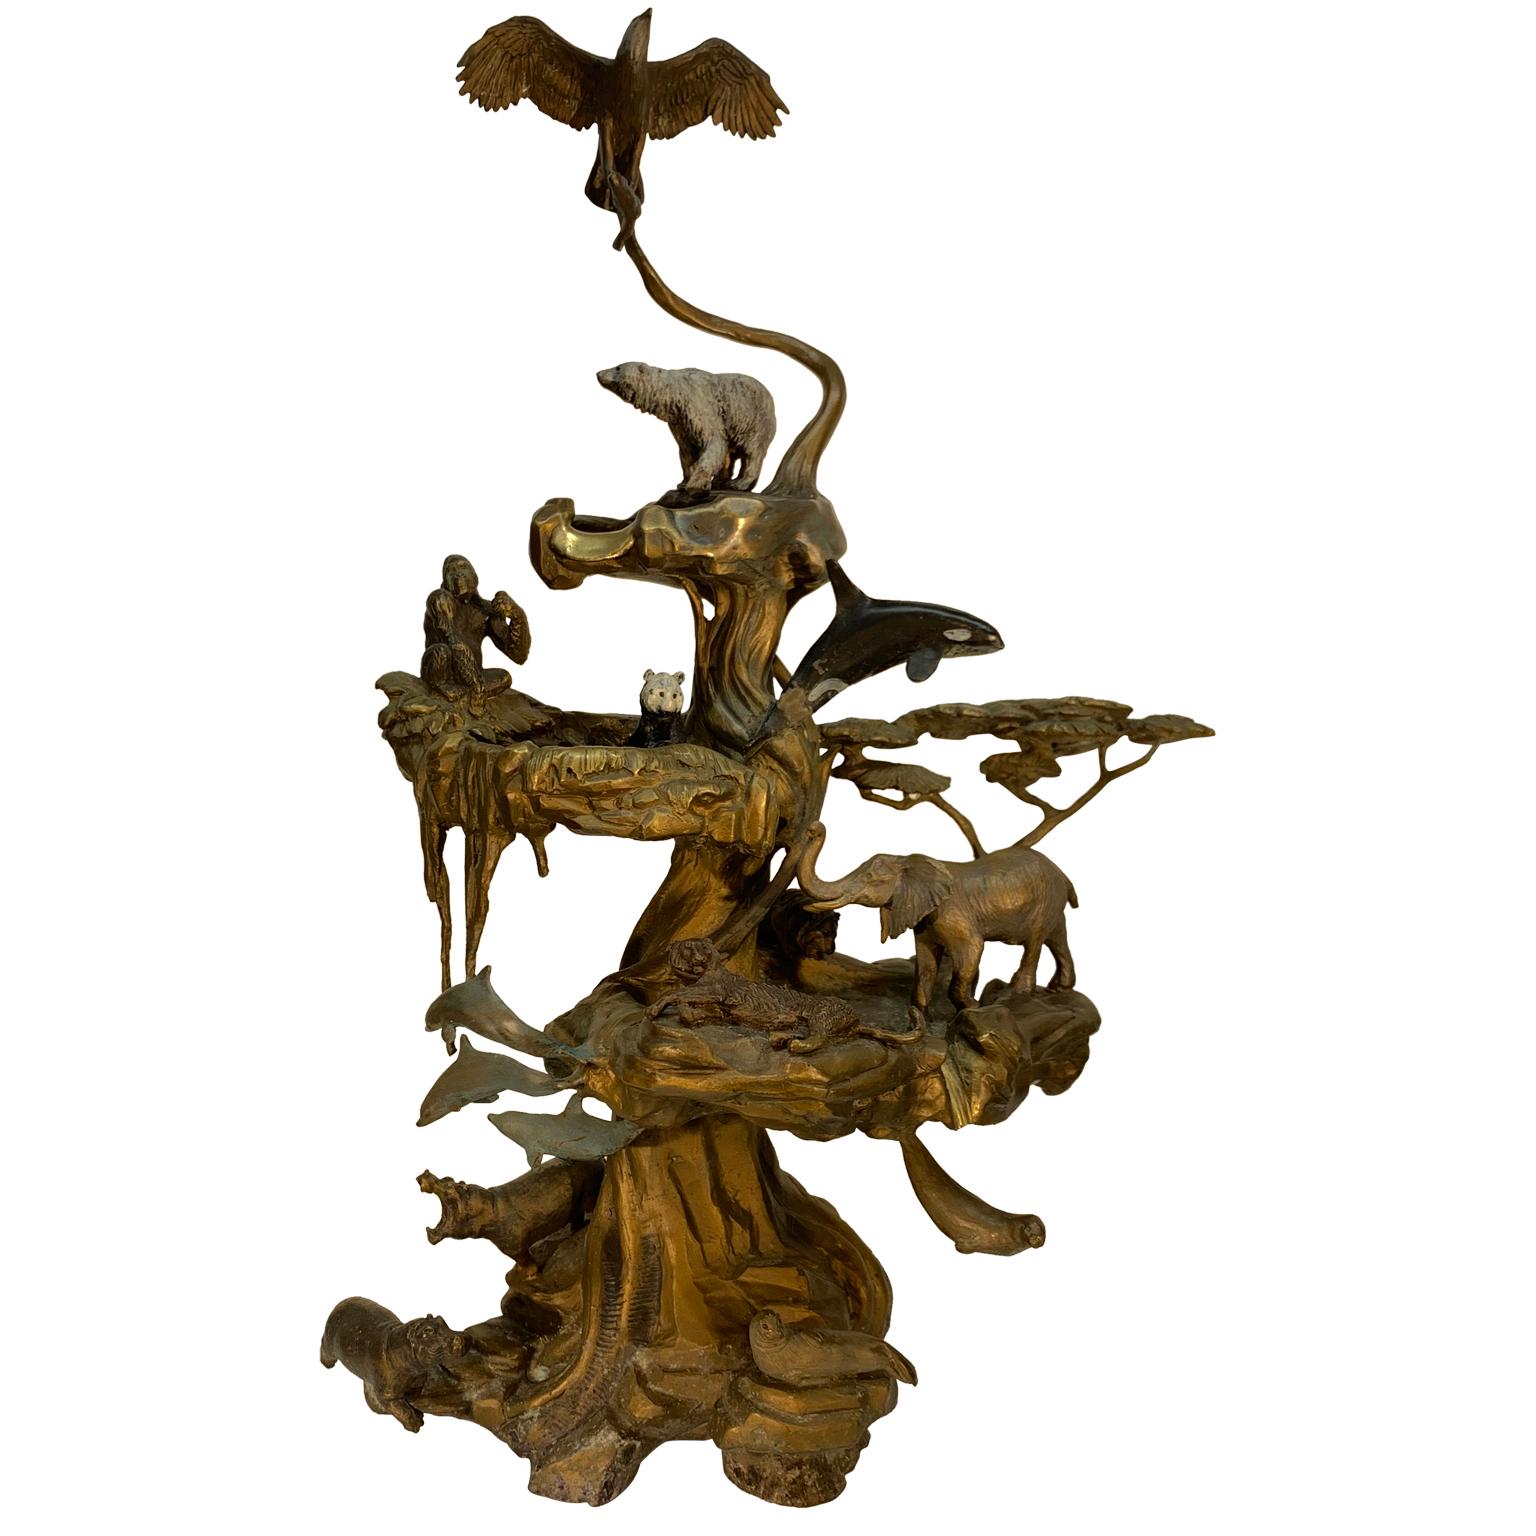 Chinese bronze fountain with animals and in the shape of a tree.
The fountain displays an eagle with a fish in its claws, a polar and panda bear. Its shows a gorilla, an elephant, a hippopotamus, a tiger, dolphins, a killer whale and finally a seal